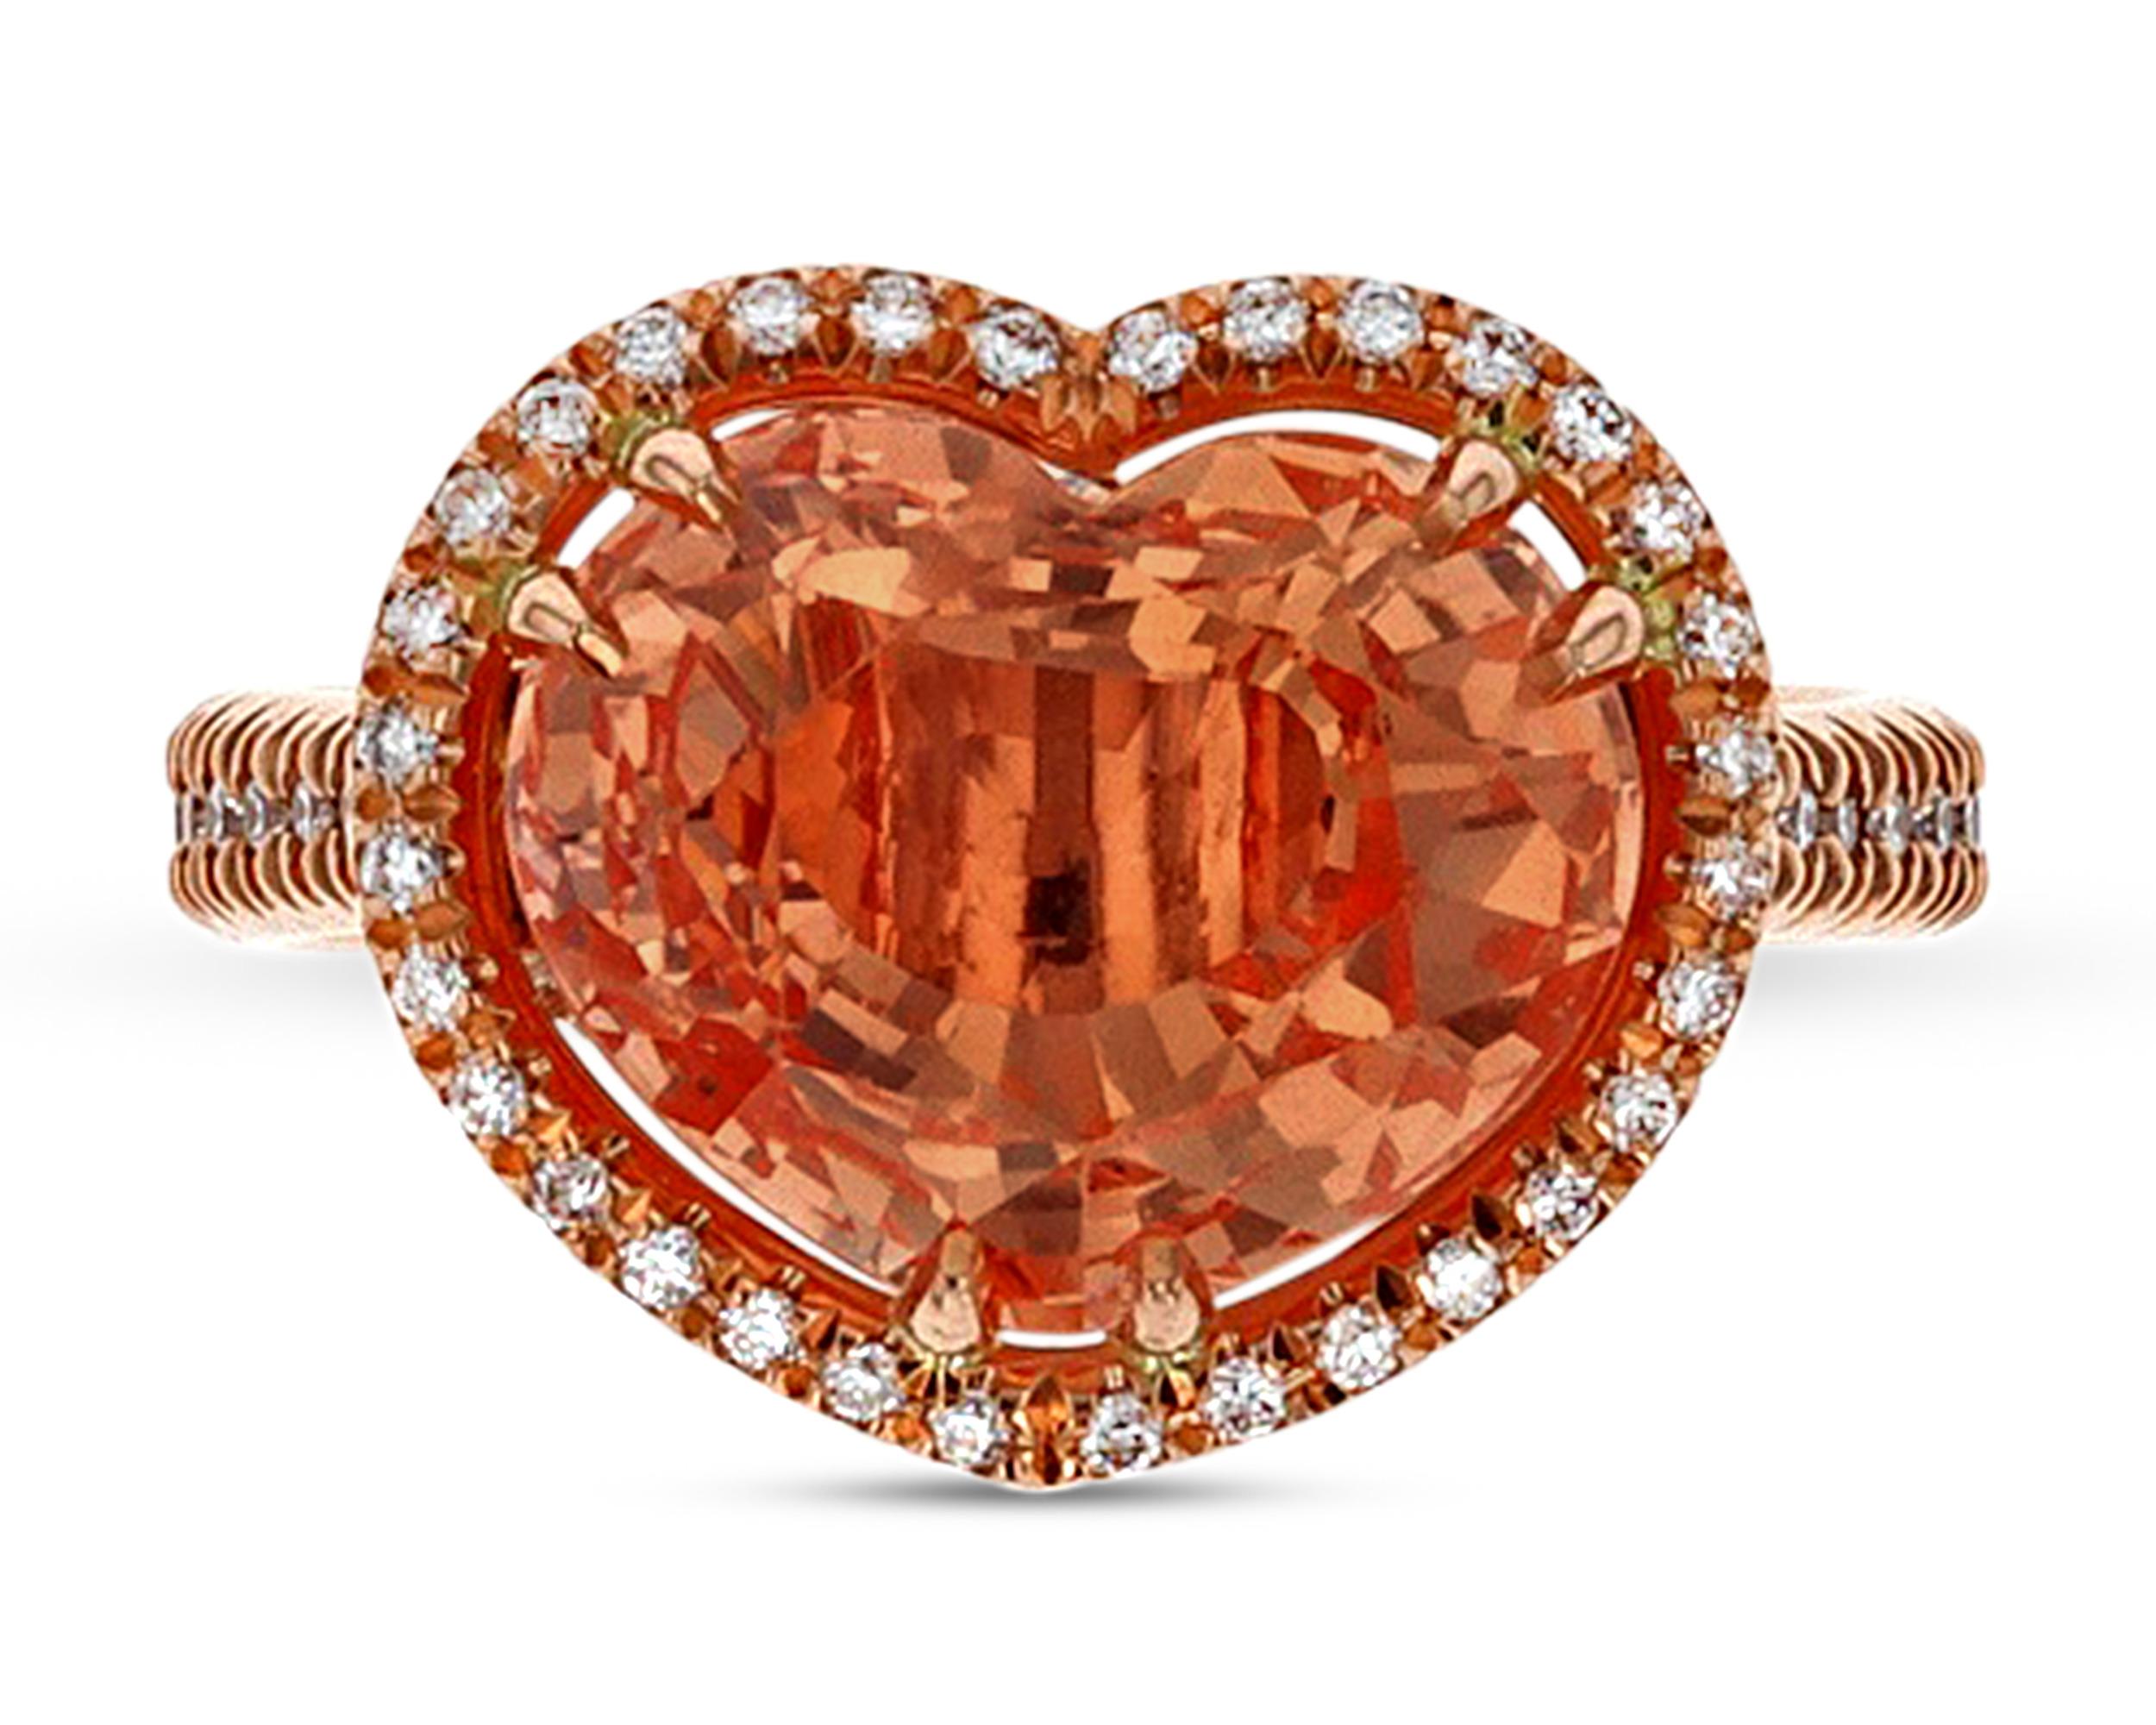 This exquisite ring features a Padparadscha sapphire, the rarest of all sapphires. Weighing 5.95 carats, this heart-shaped gem displays the pinkish-orange color that makes these stones so highly coveted. The sapphire is certified by the Gemresearch